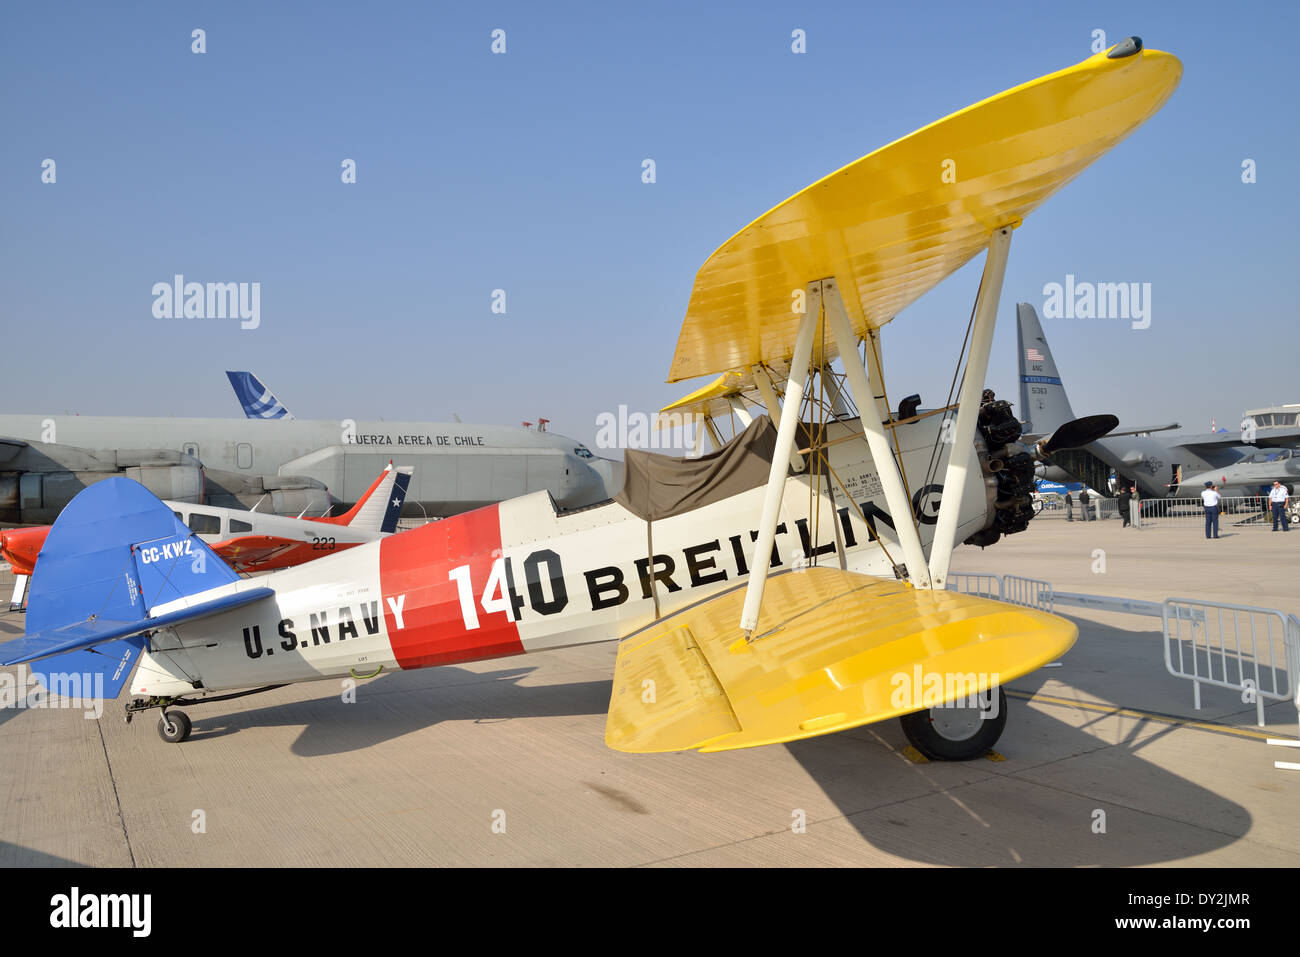 US Navy version of the Stearman Model 75 biplane trainer (Breitling advertising) Stock Photo